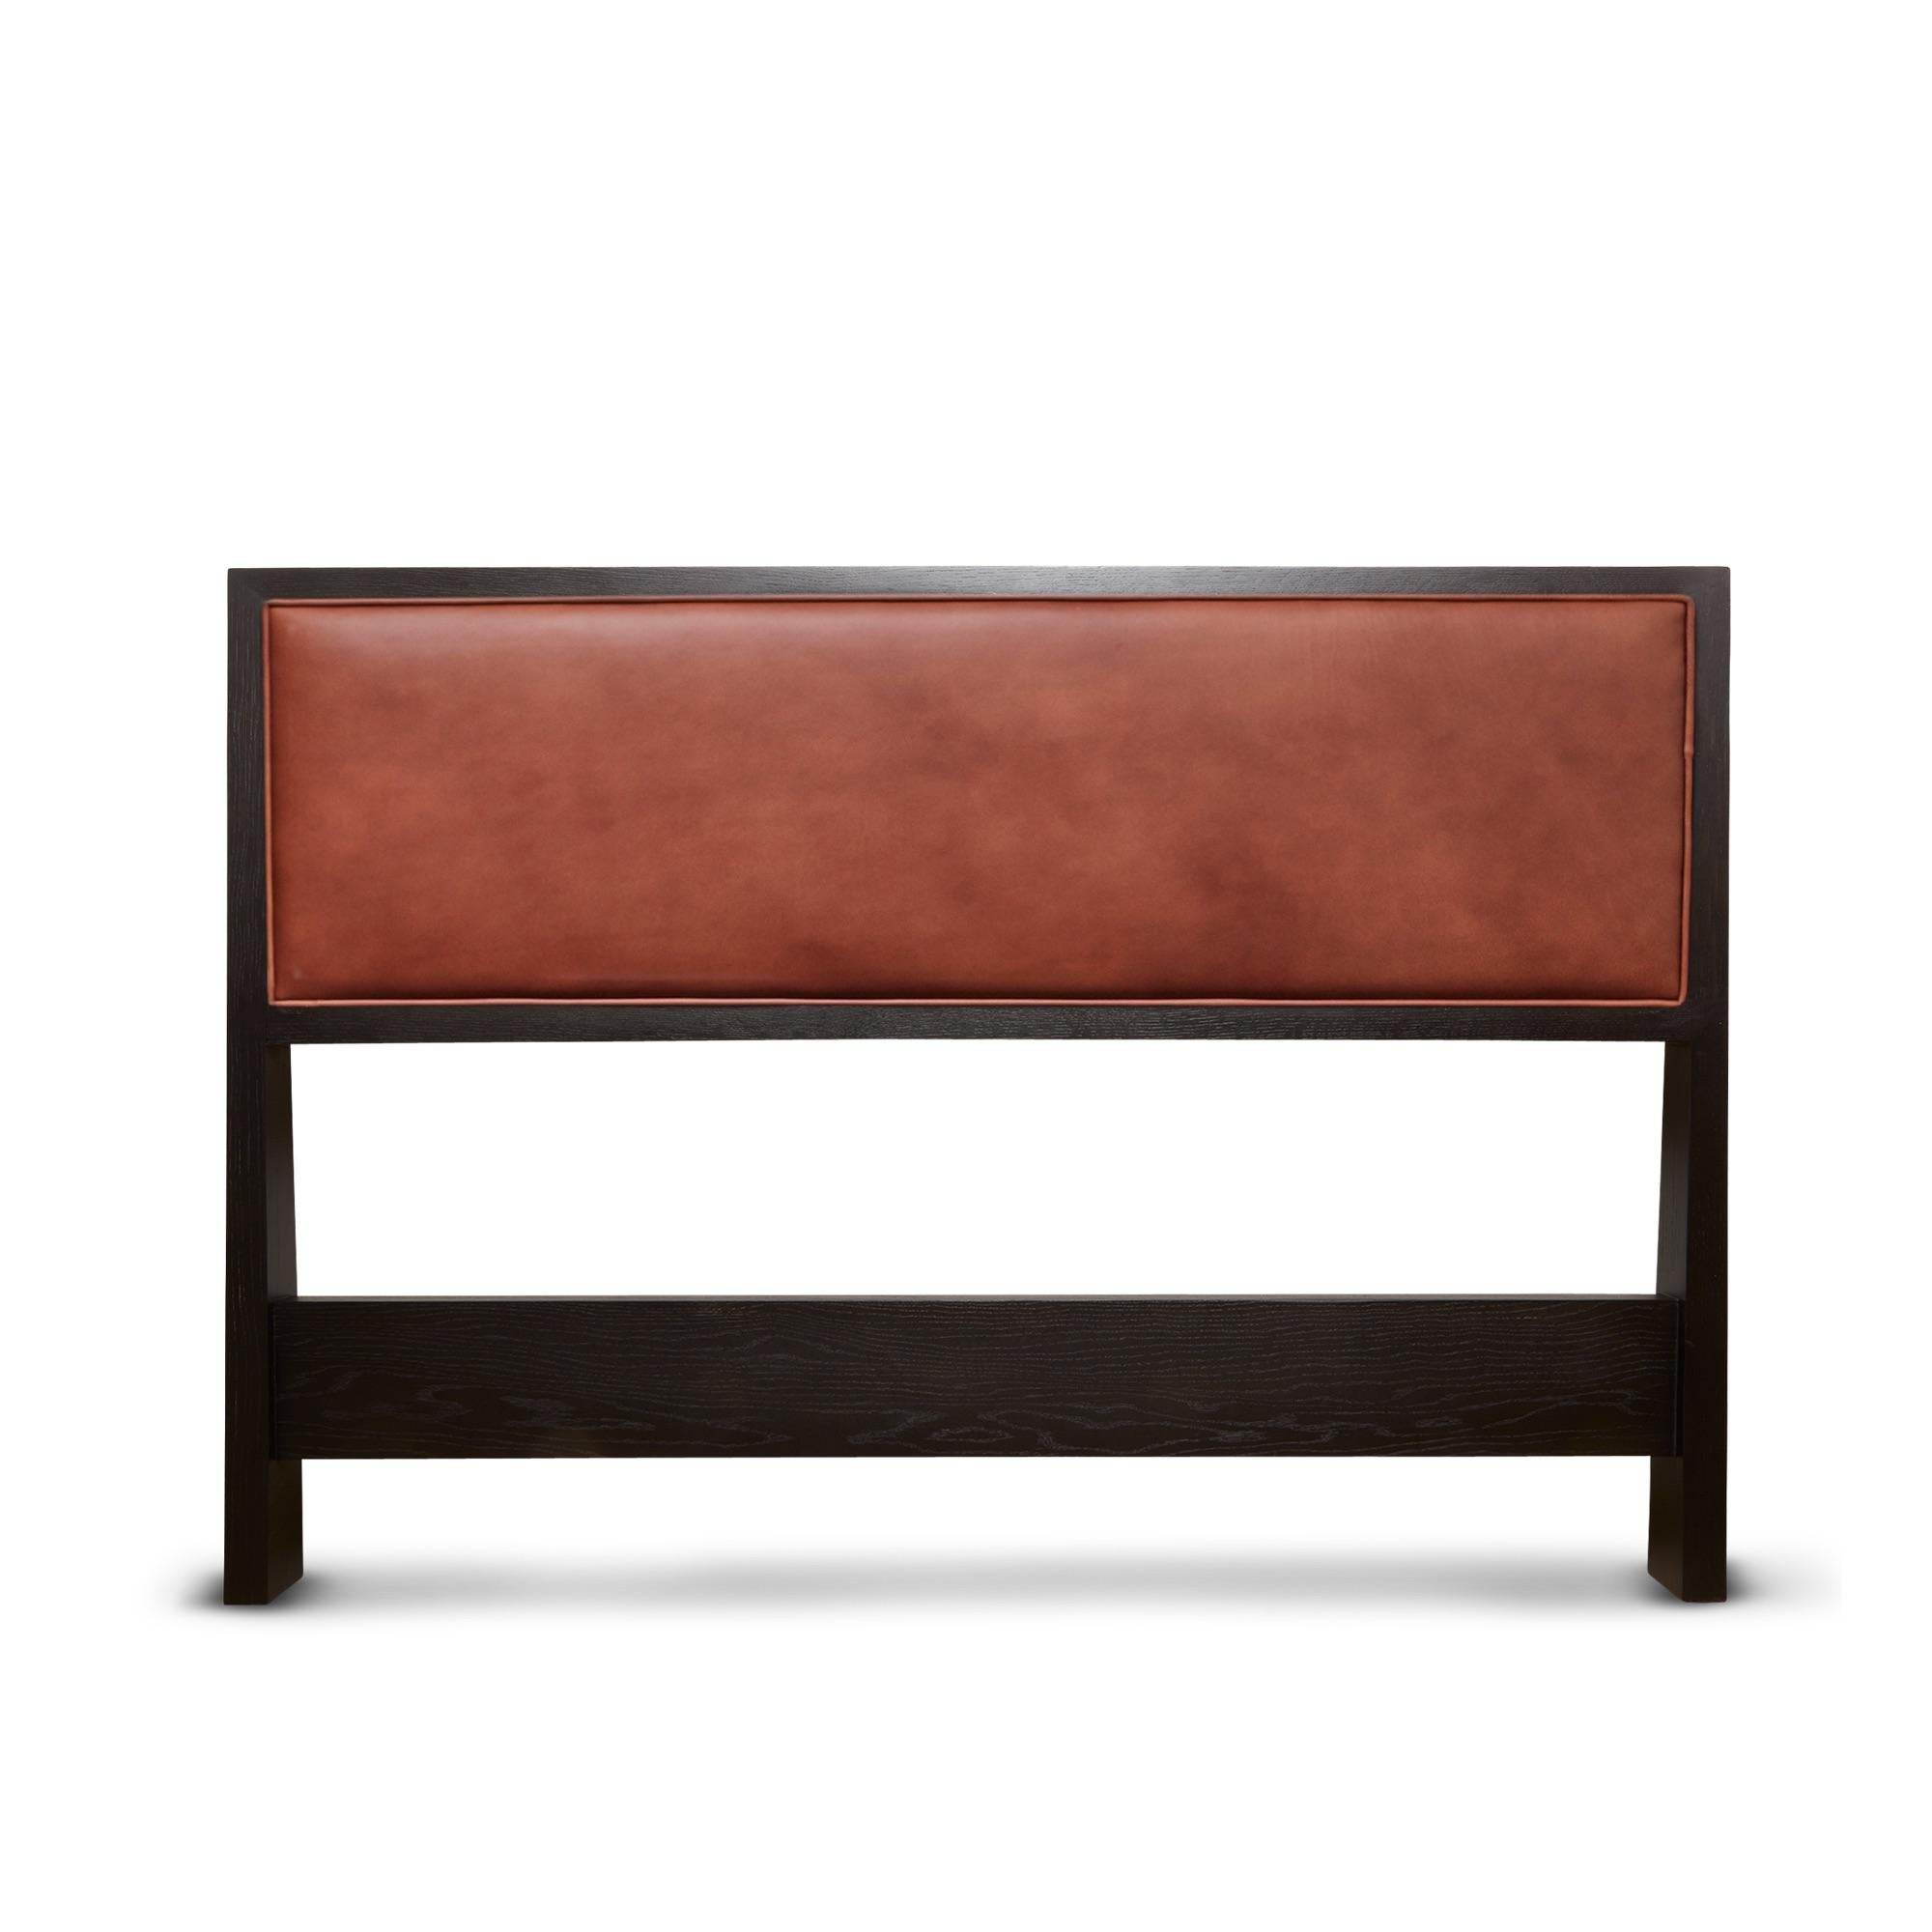 The Auden headboard is a solid wood upholstered headboard that can be made in either American walnut or white oak. Includes french cleat for wall mounting. 

The Lawson-Fenning Collection is designed and handmade in Los Angeles, California.
Reach